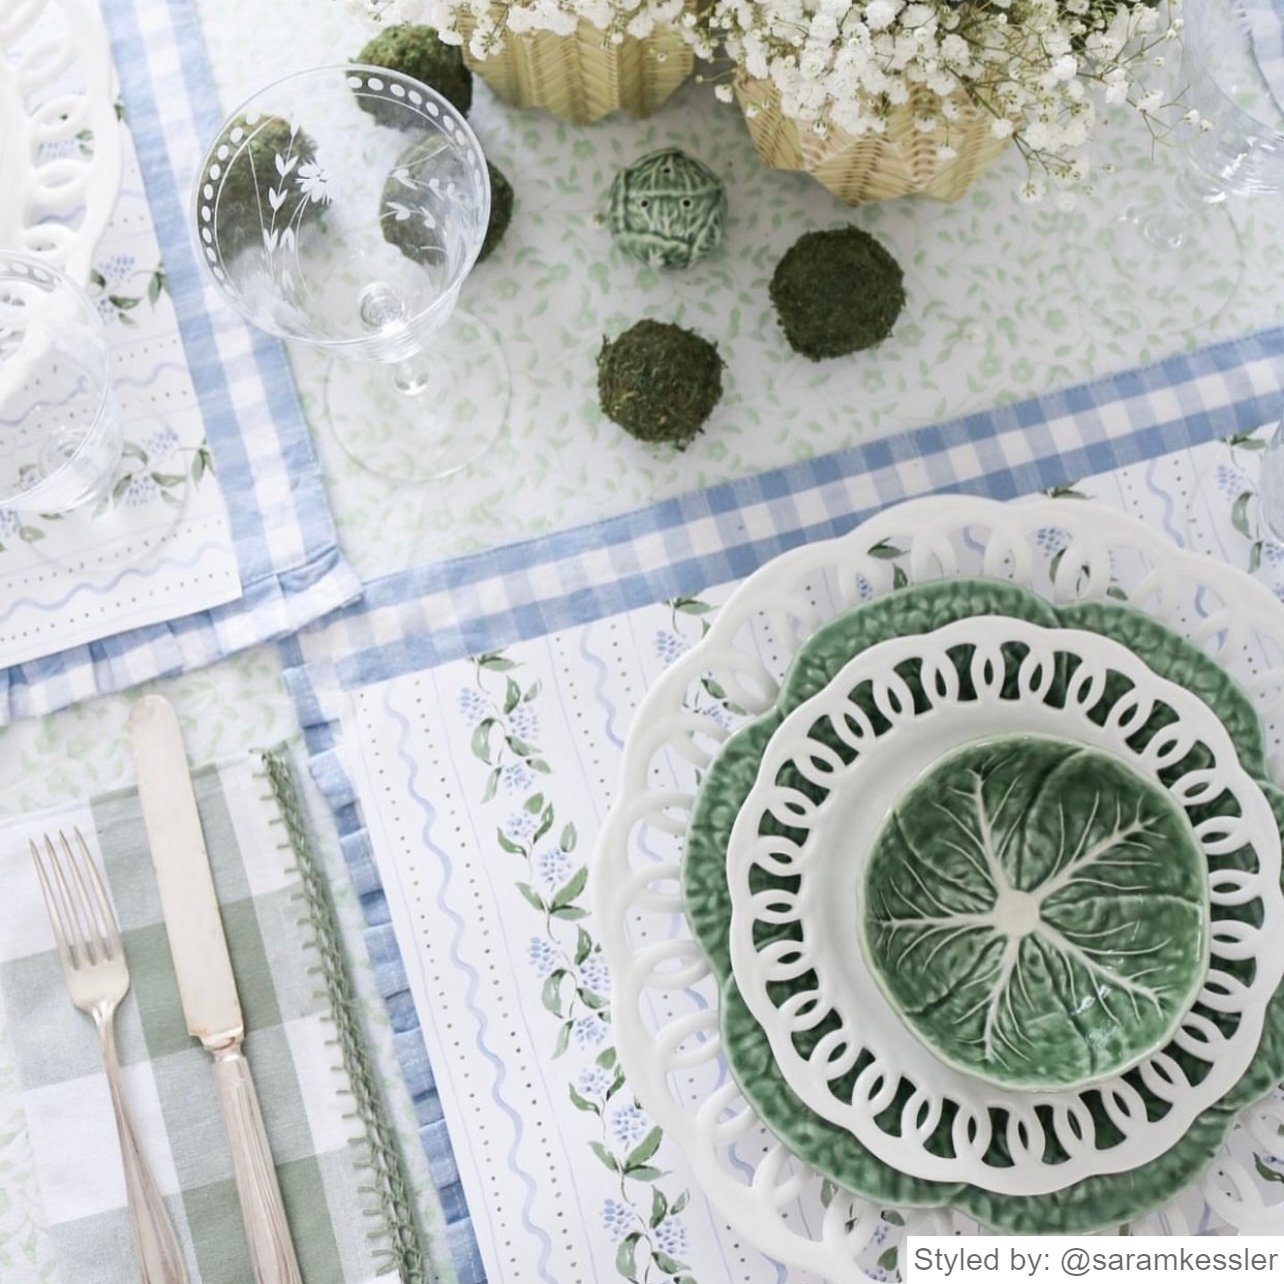 Place setting with white floral paper placemats layered with white and green dishes on a blue gingham placemat and green and white tablecloth